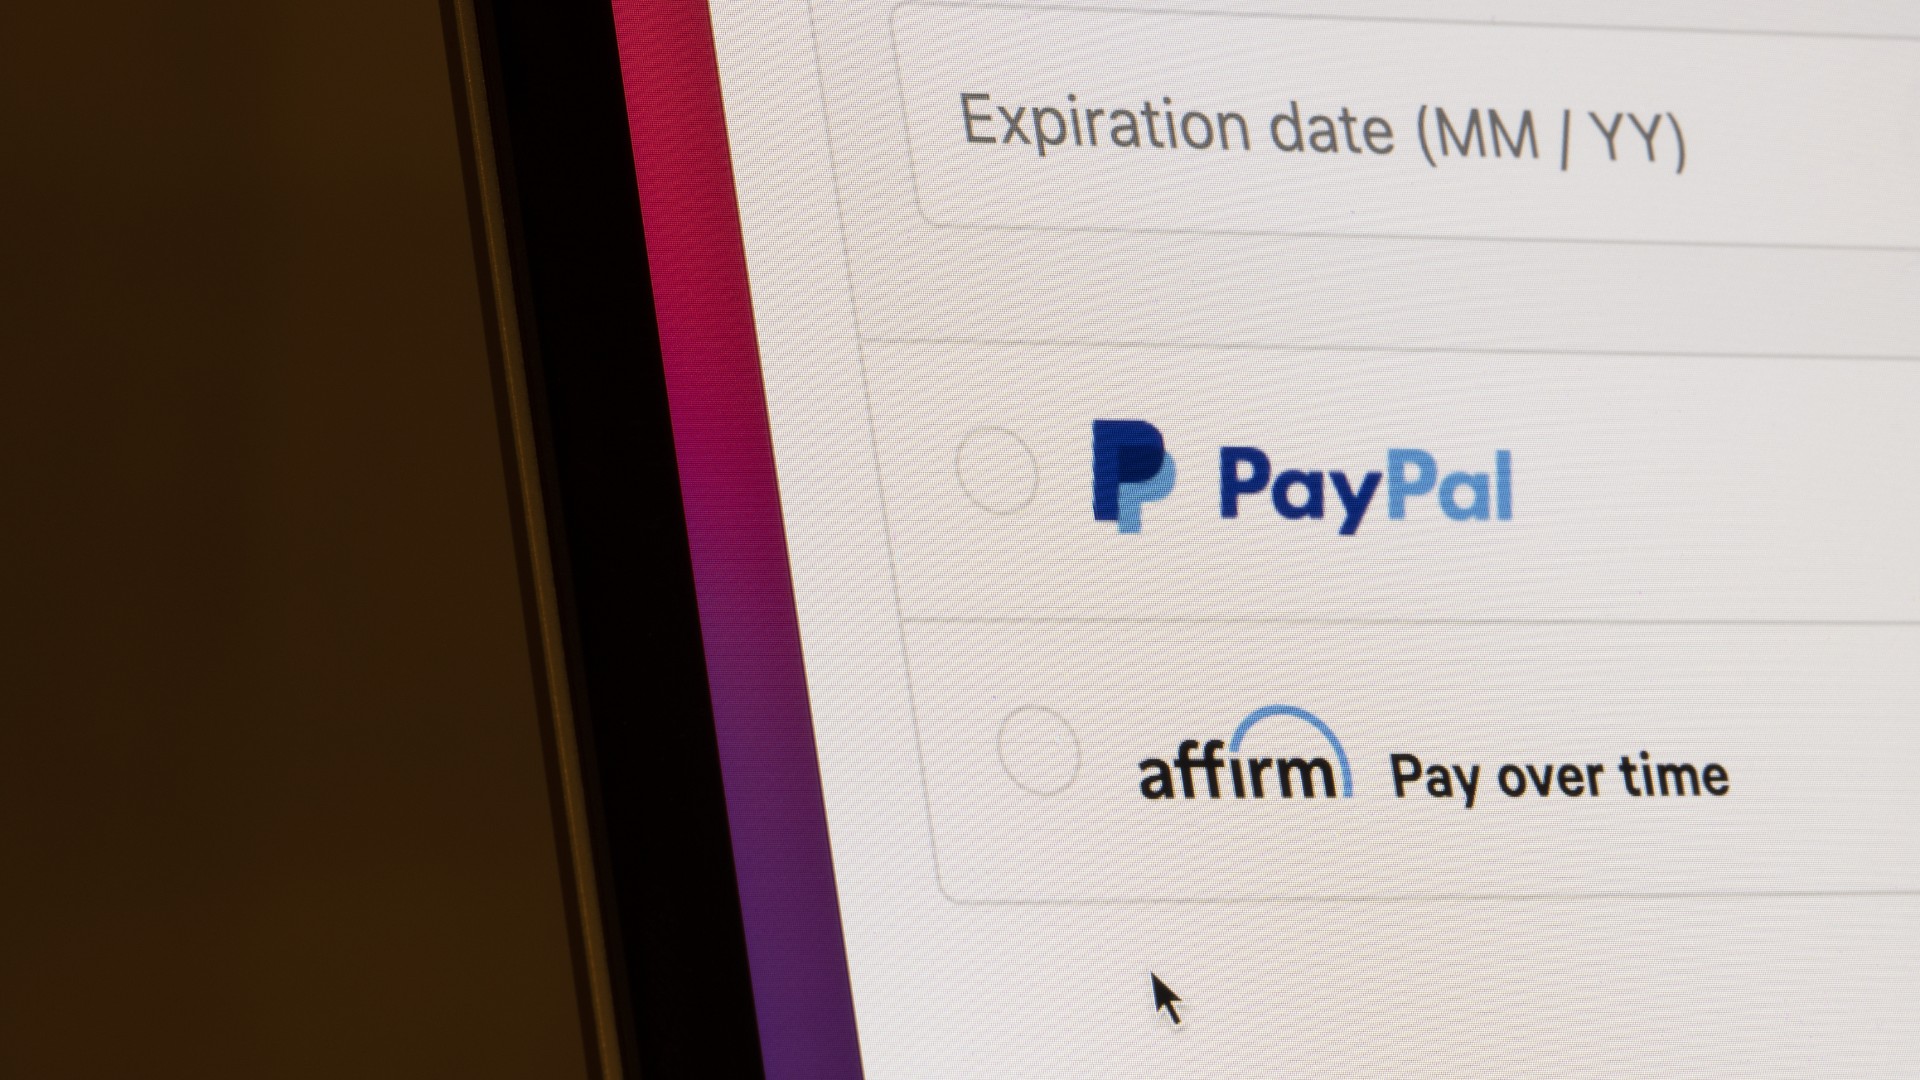 Allow for multiple payment options and integrations 